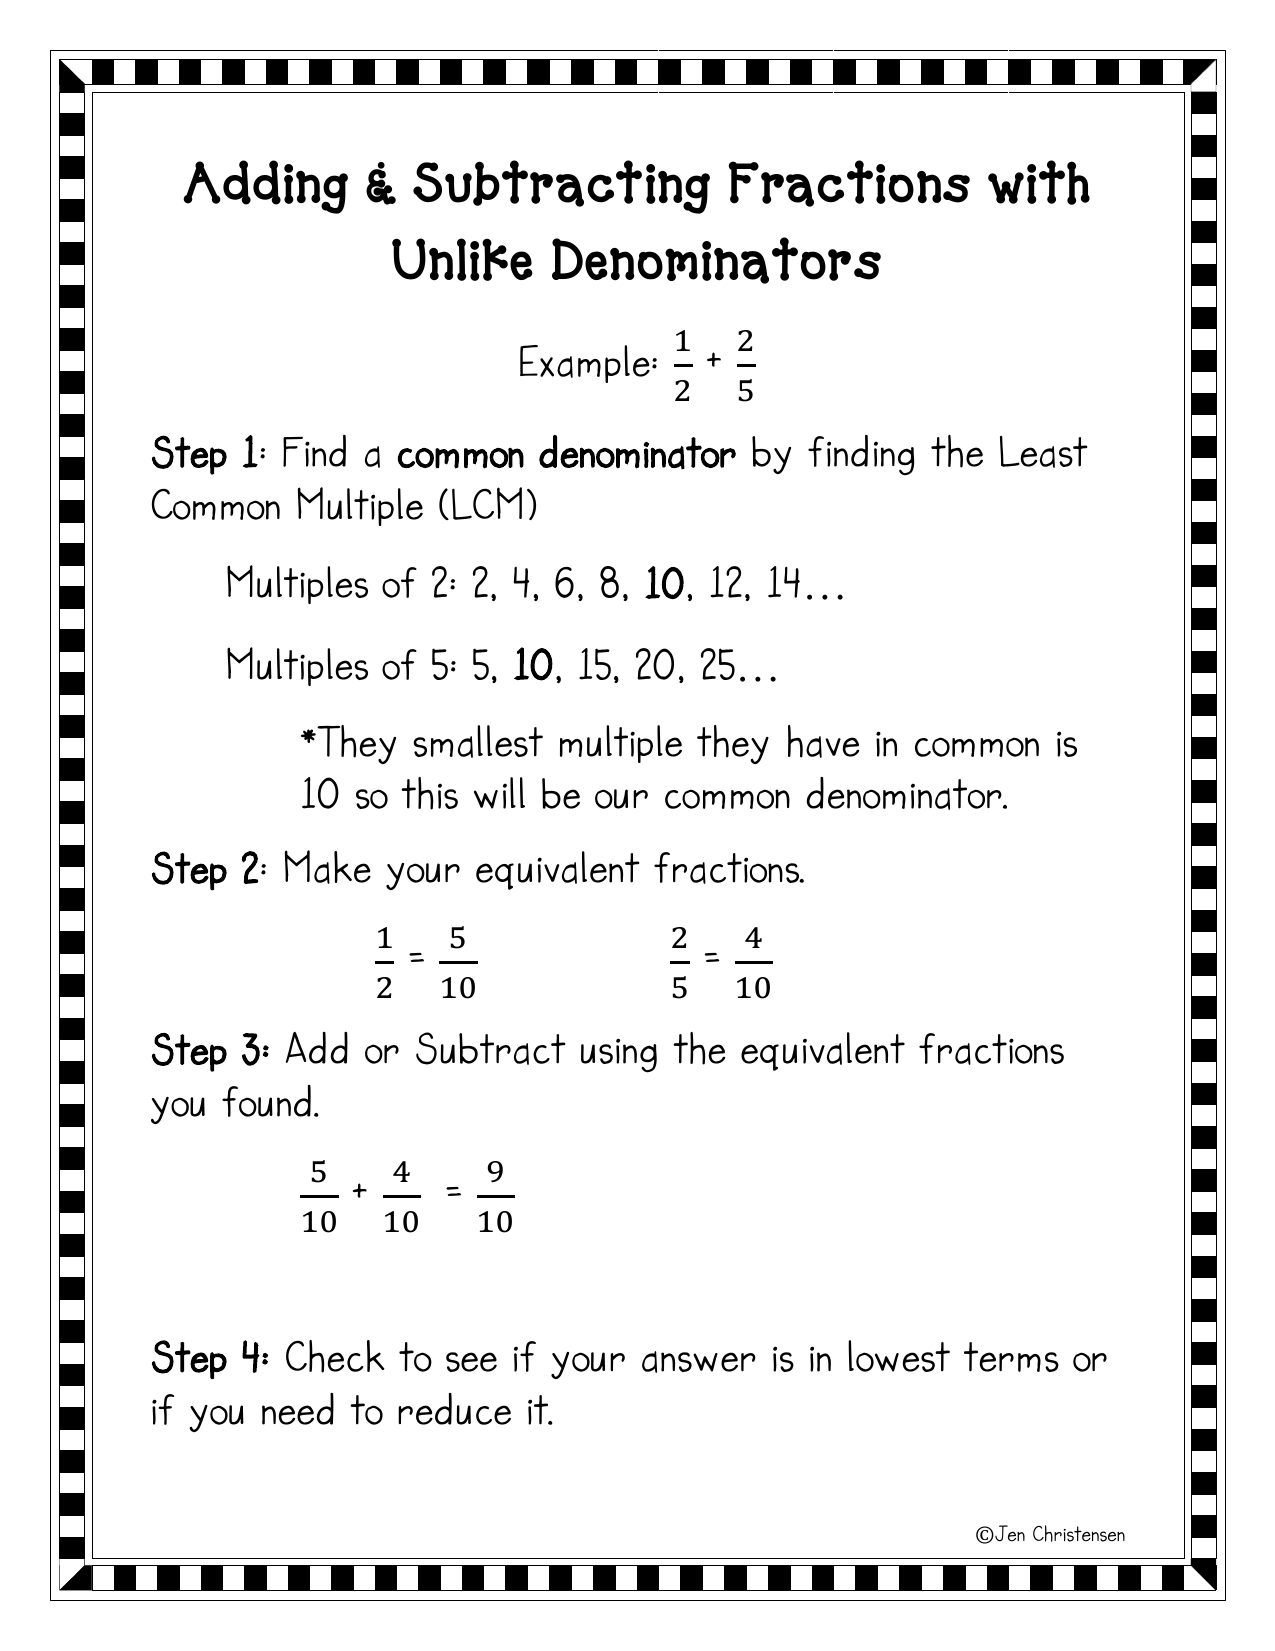 ding-subtracting-fractions-with-unlike-denominators-notes